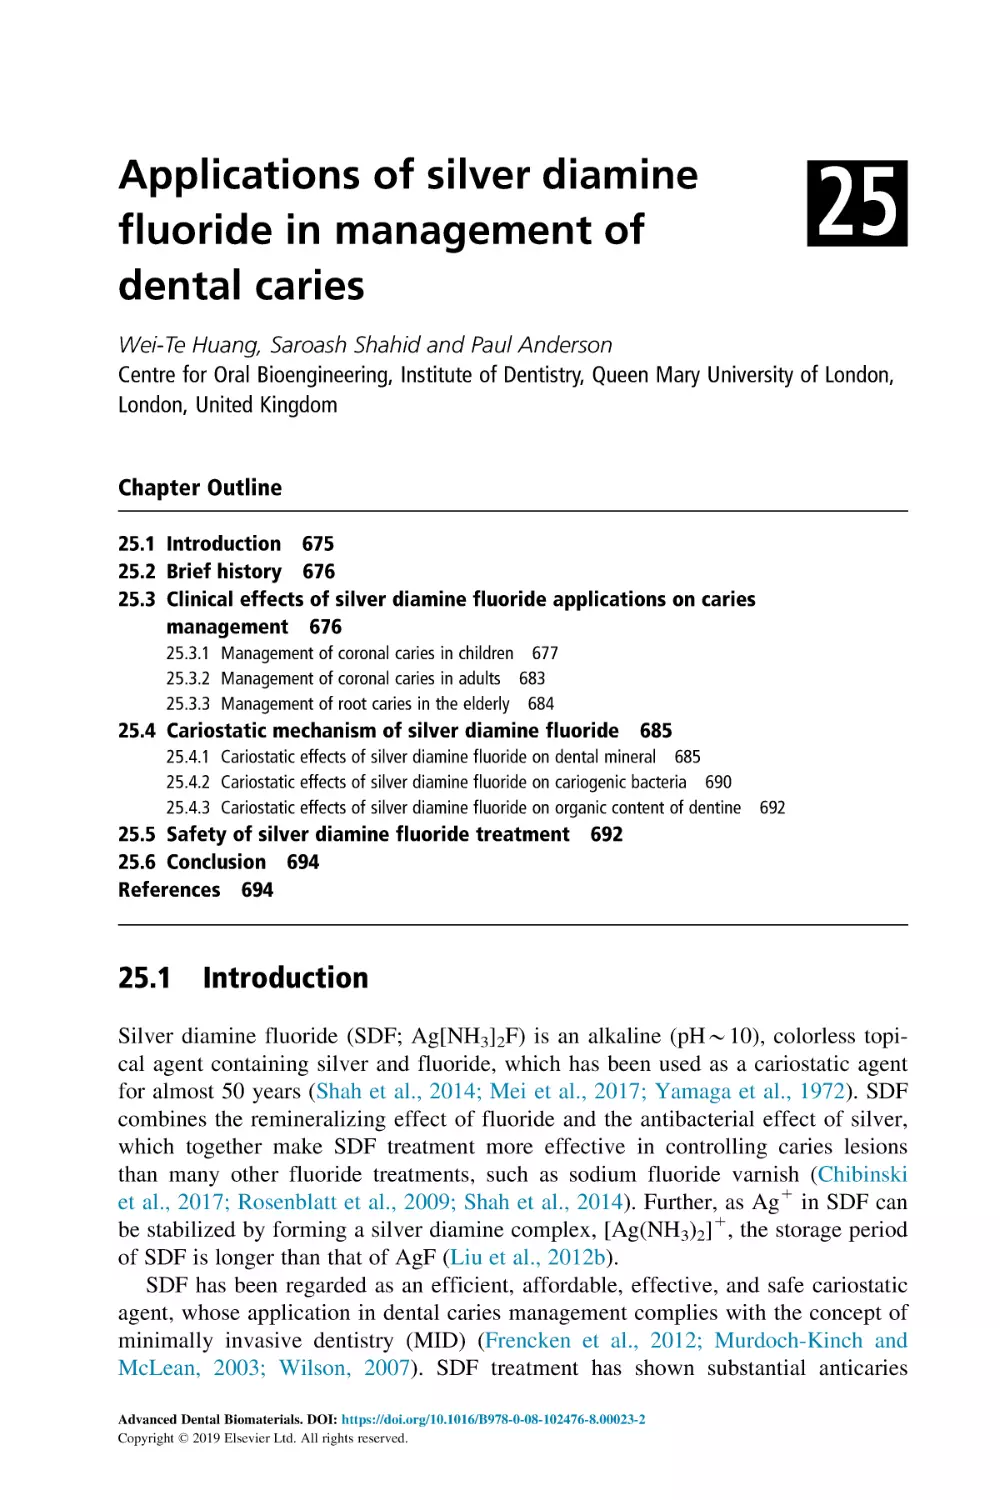 25 Applications of silver diamine fluoride in management of dental caries
Chapter Outline
25.1 Introduction